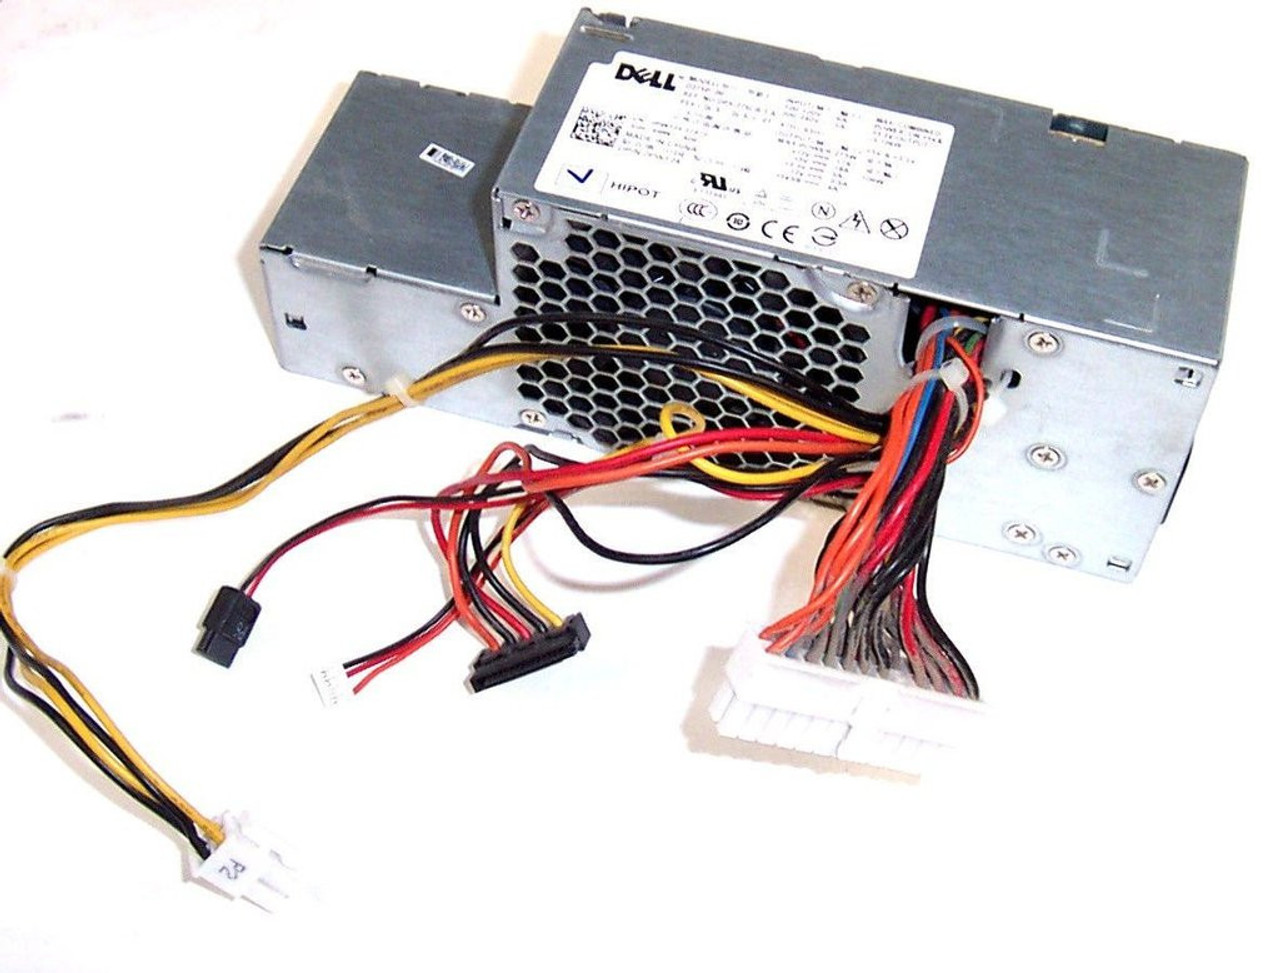 Dell Optiplex 755 Power Supply Sff Rm117 Discount Electronics